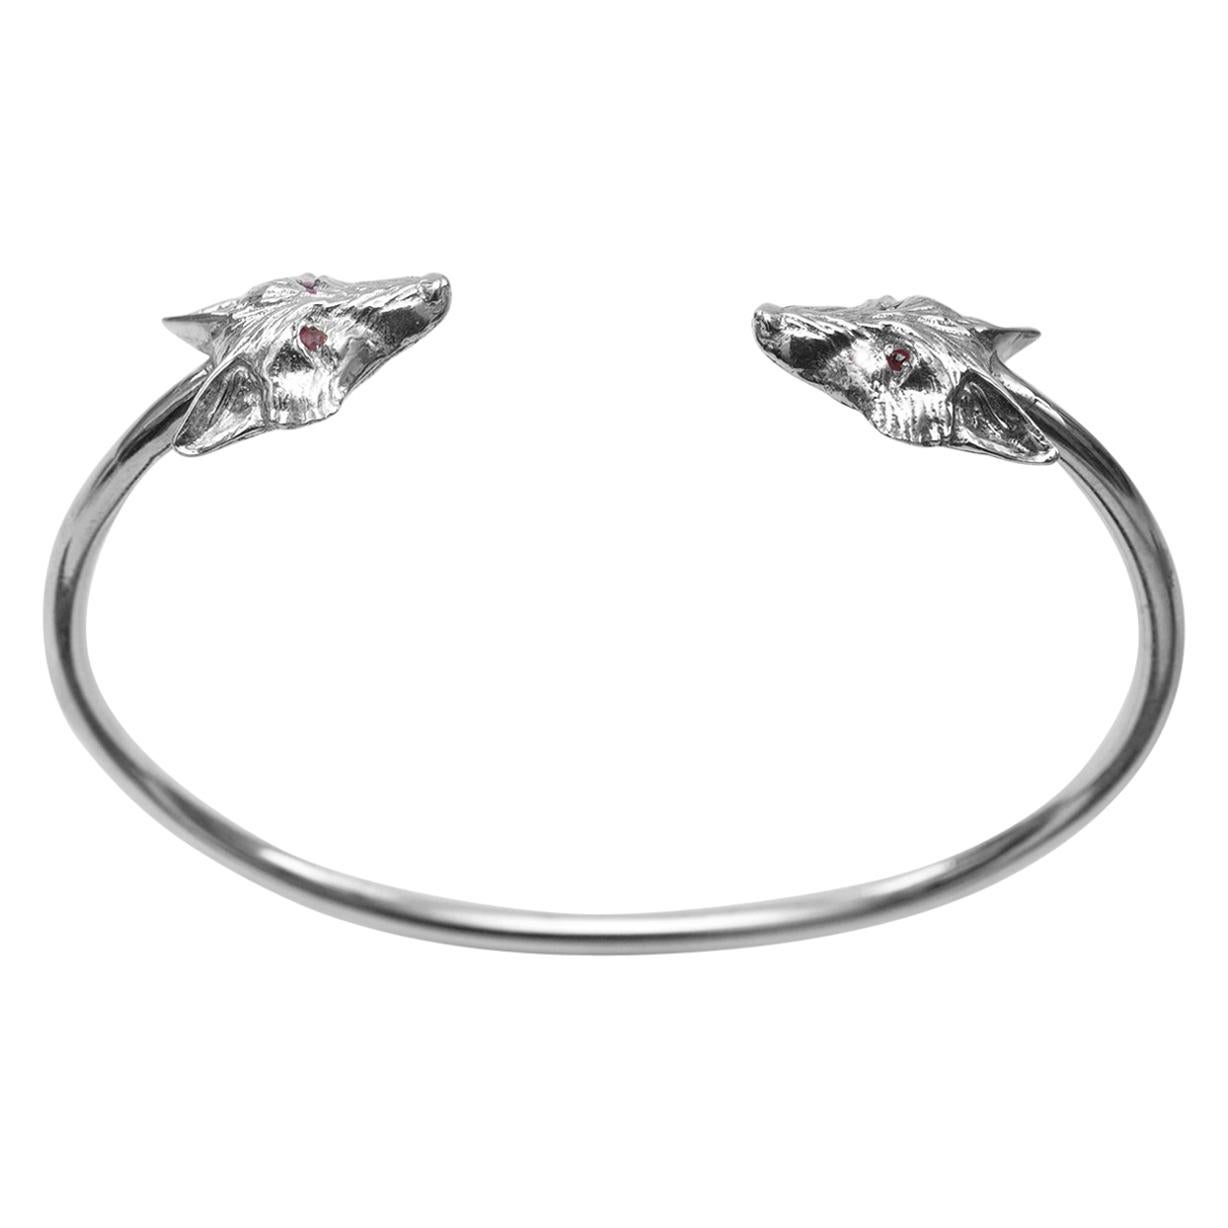 A striking Fox bangle in solid Sterling Silver, with Rubies.

This sturdy but feminine Fox bangle was made to mark Simon Kemp Jewellers' 25th Anniversary.

The crisp combination of Silver and Rubies lends this bangle a simplicity which lets the